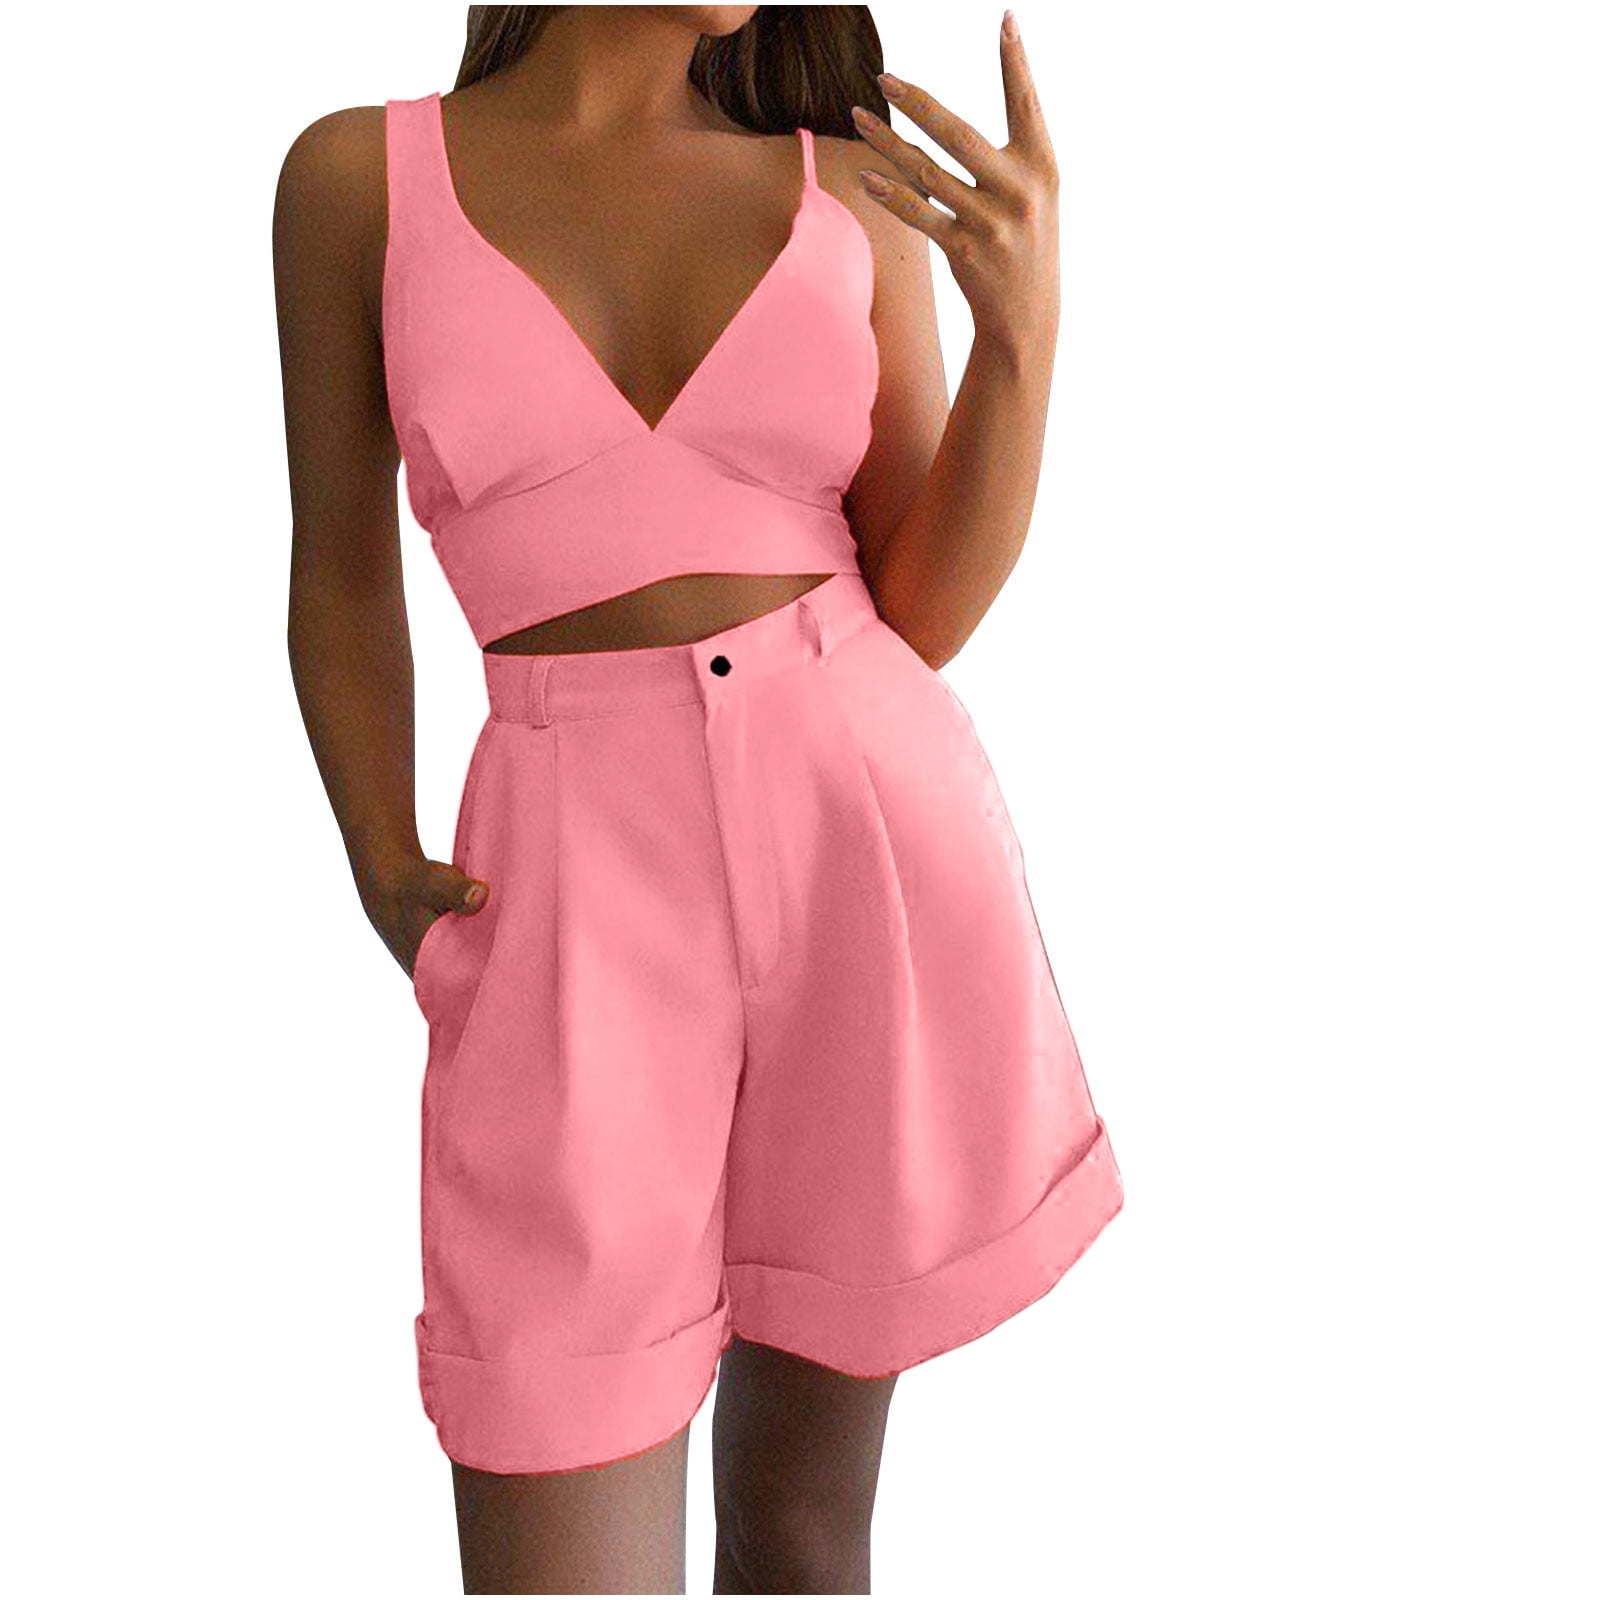 REORIAFEE 60s Outfits for Women Disco Outfit Women Casual Summer Sleeveless  Tops Long Pants Two Pieces Set Suit Pink M 